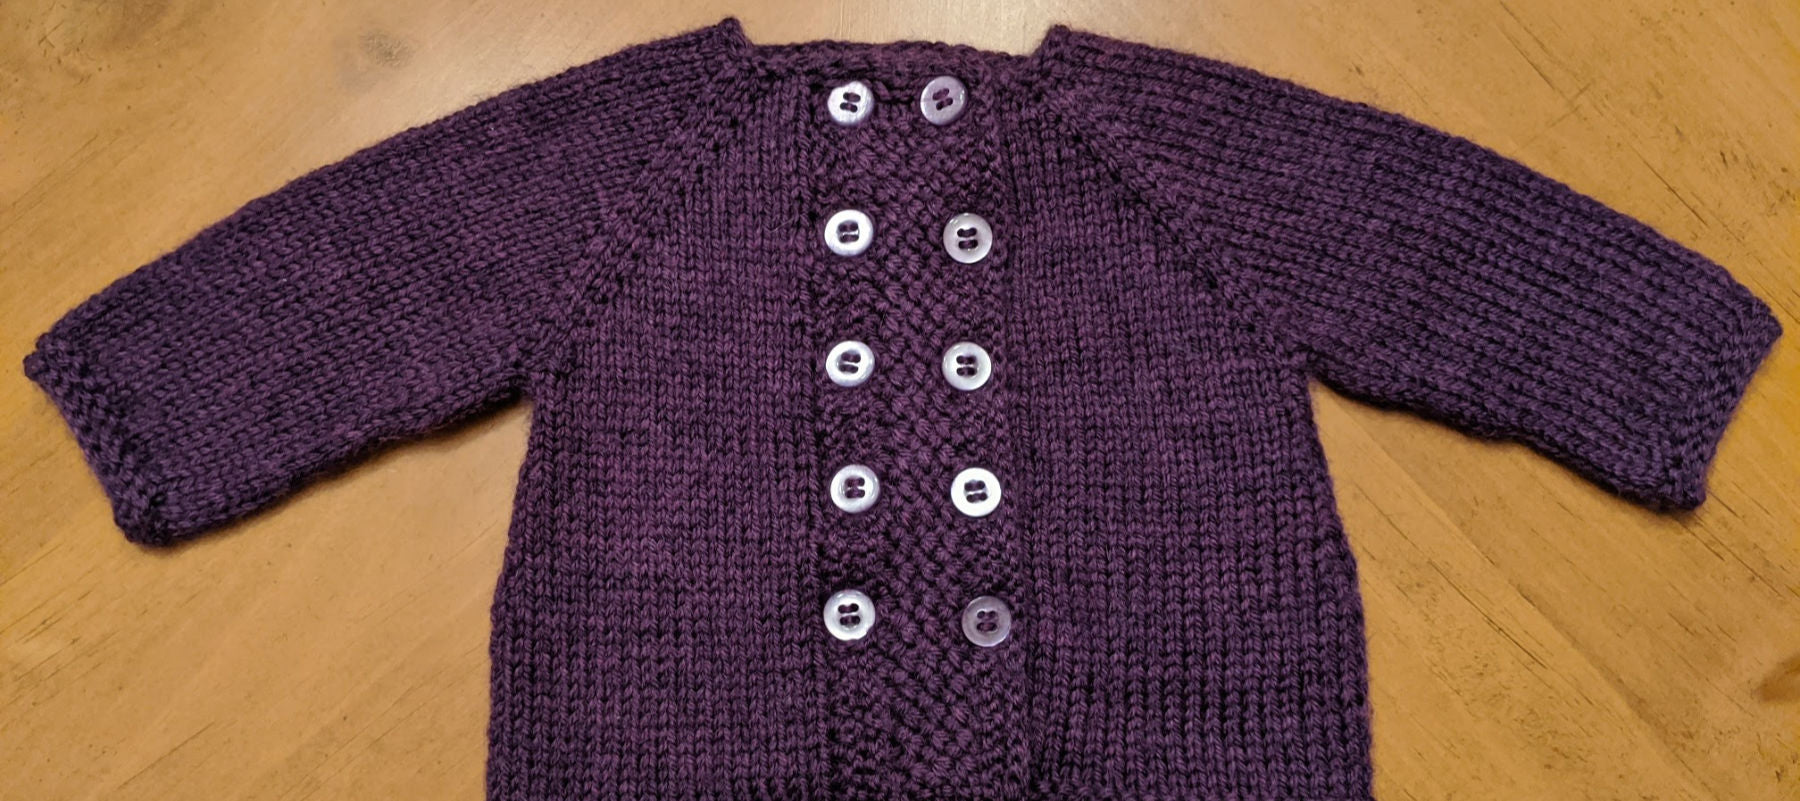 Tips for Knitting Sweaters that Look Great